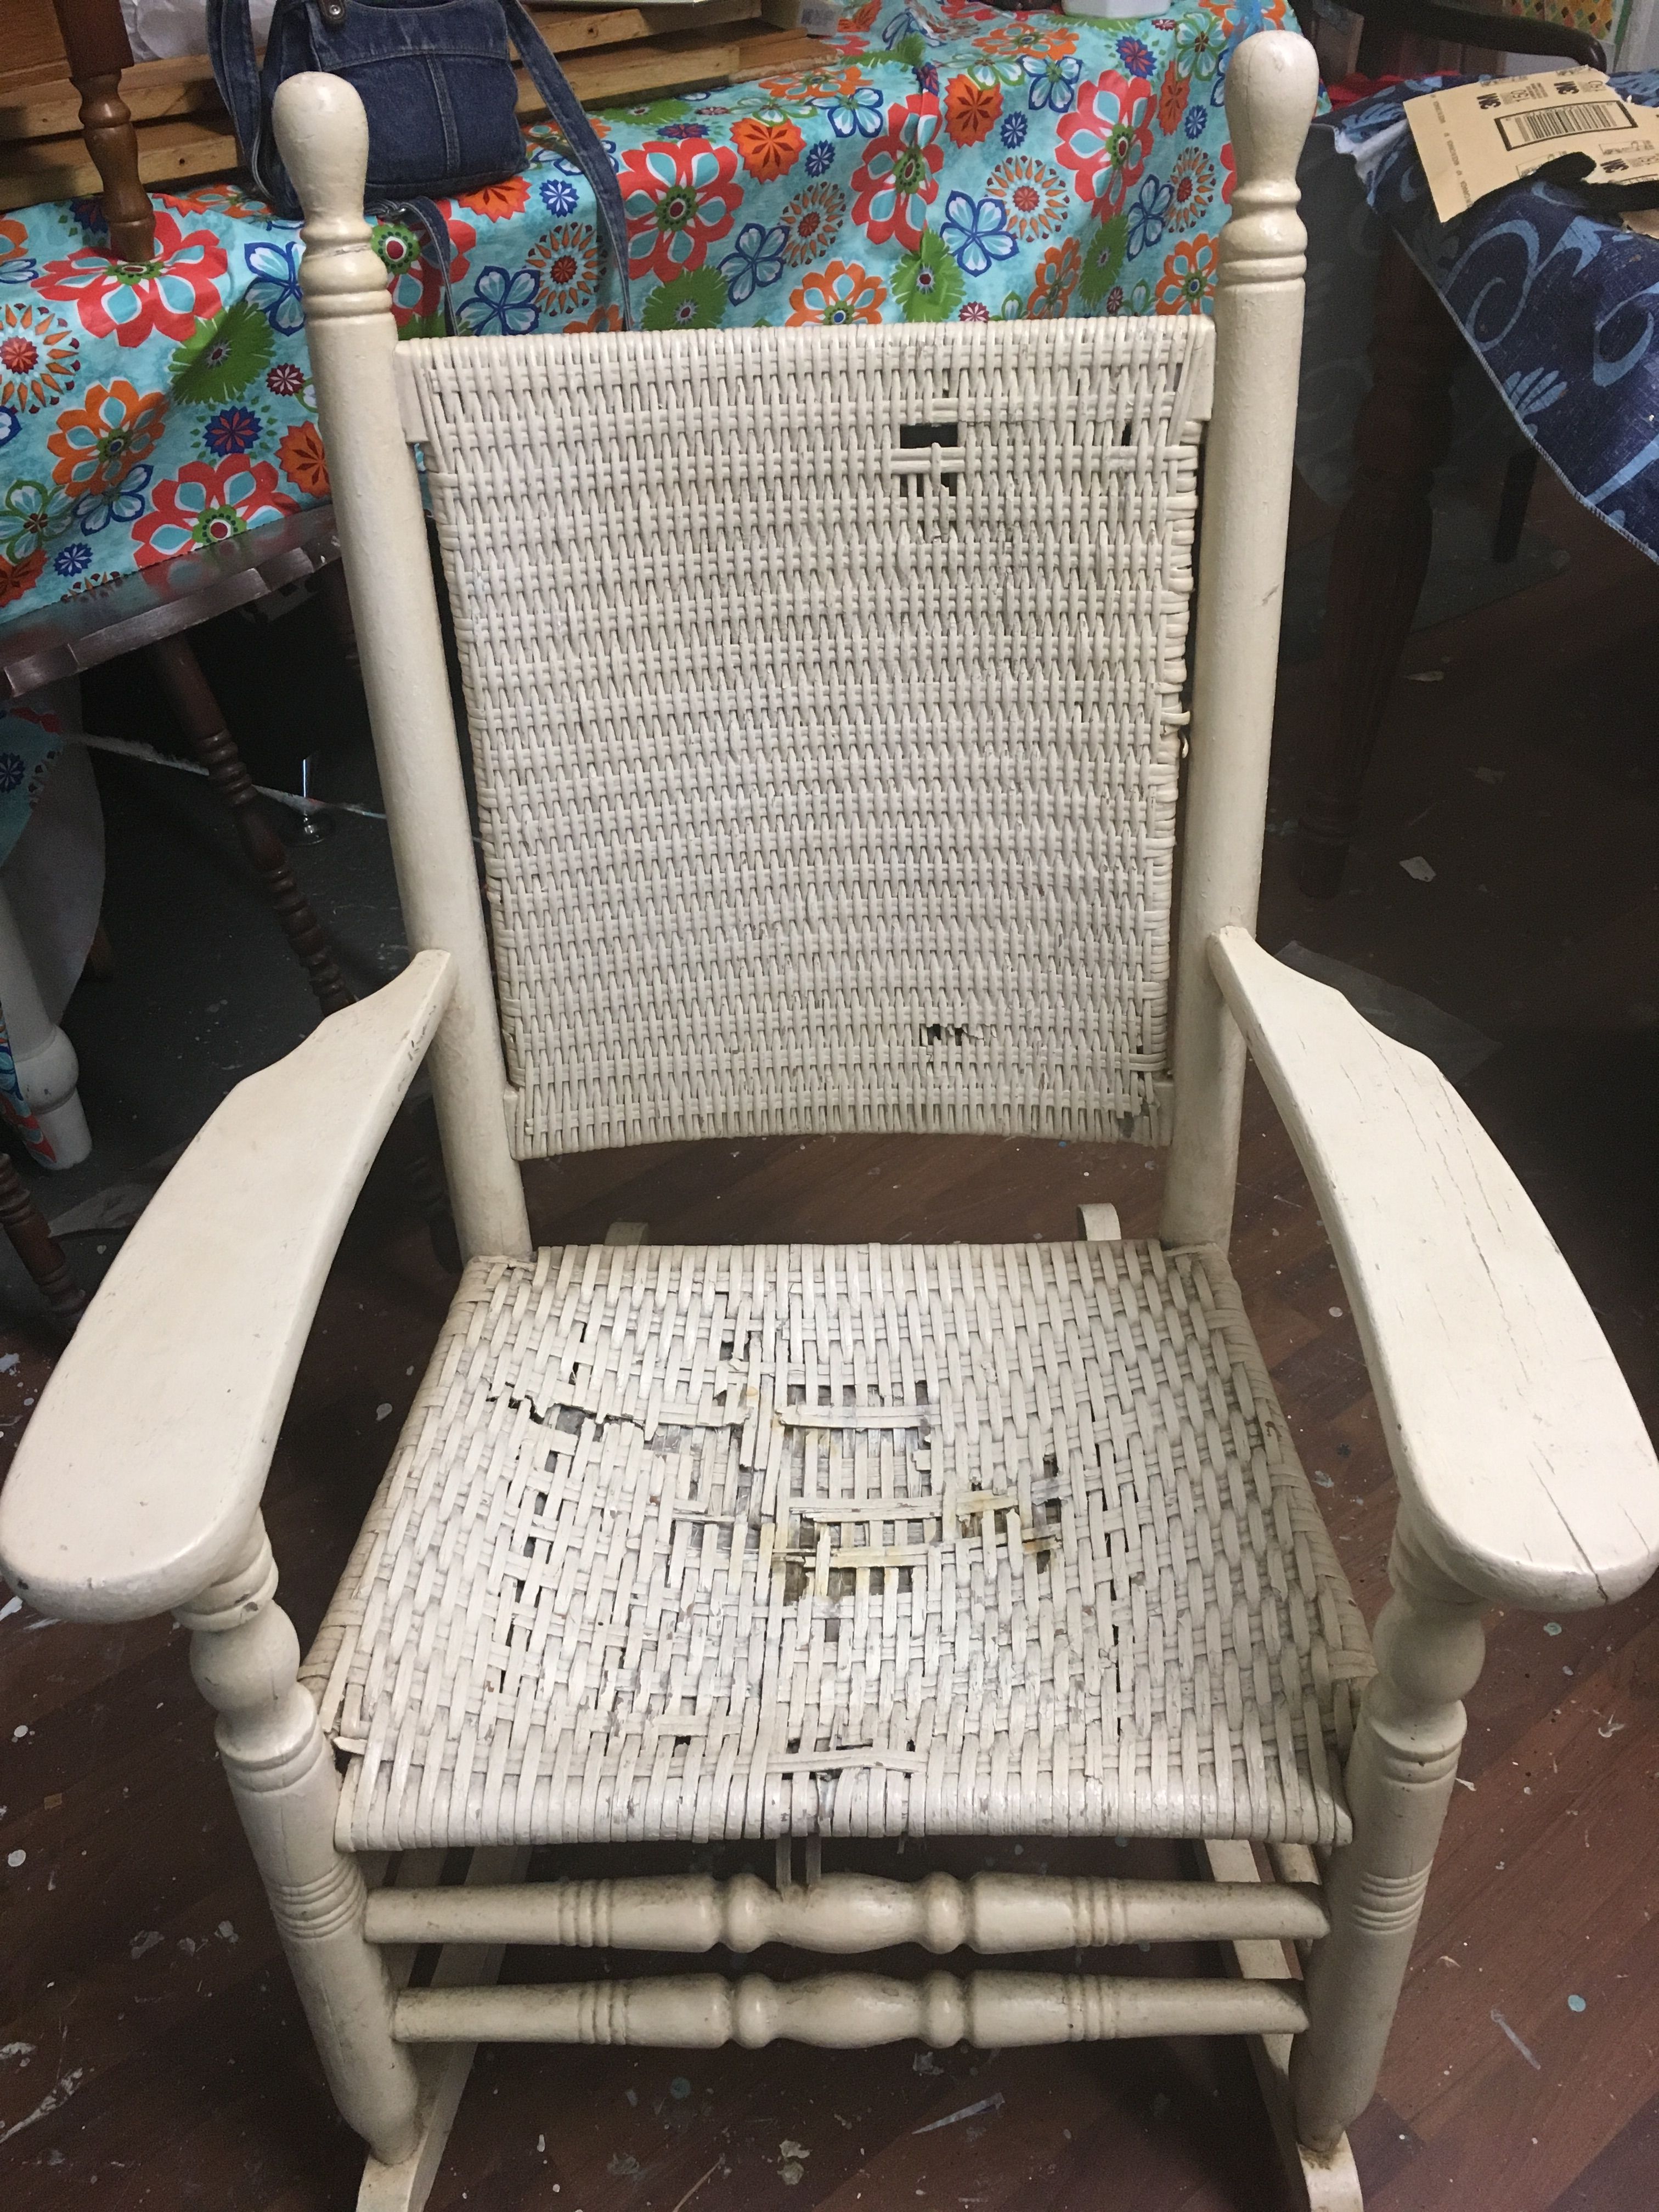 Restoring Old Wicker Rocking Chair | Ginger's Attic With Regard To Vintage Wicker Rocking Chairs (View 12 of 15)